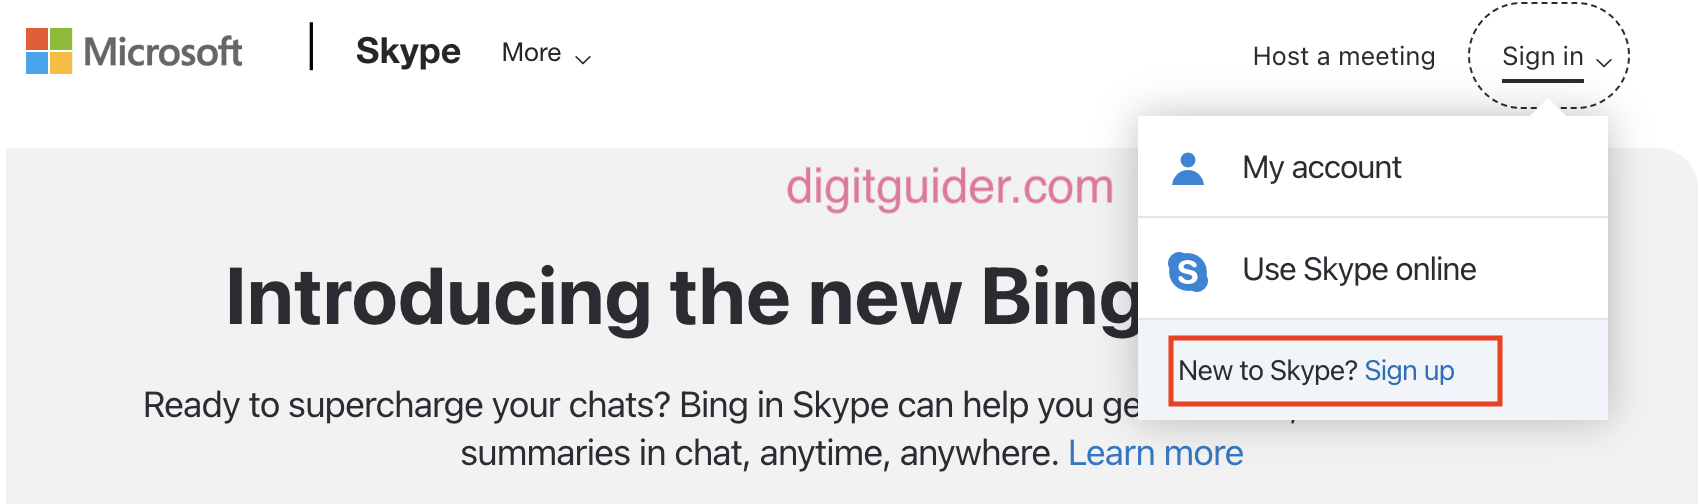 Sign up a new Skype Account